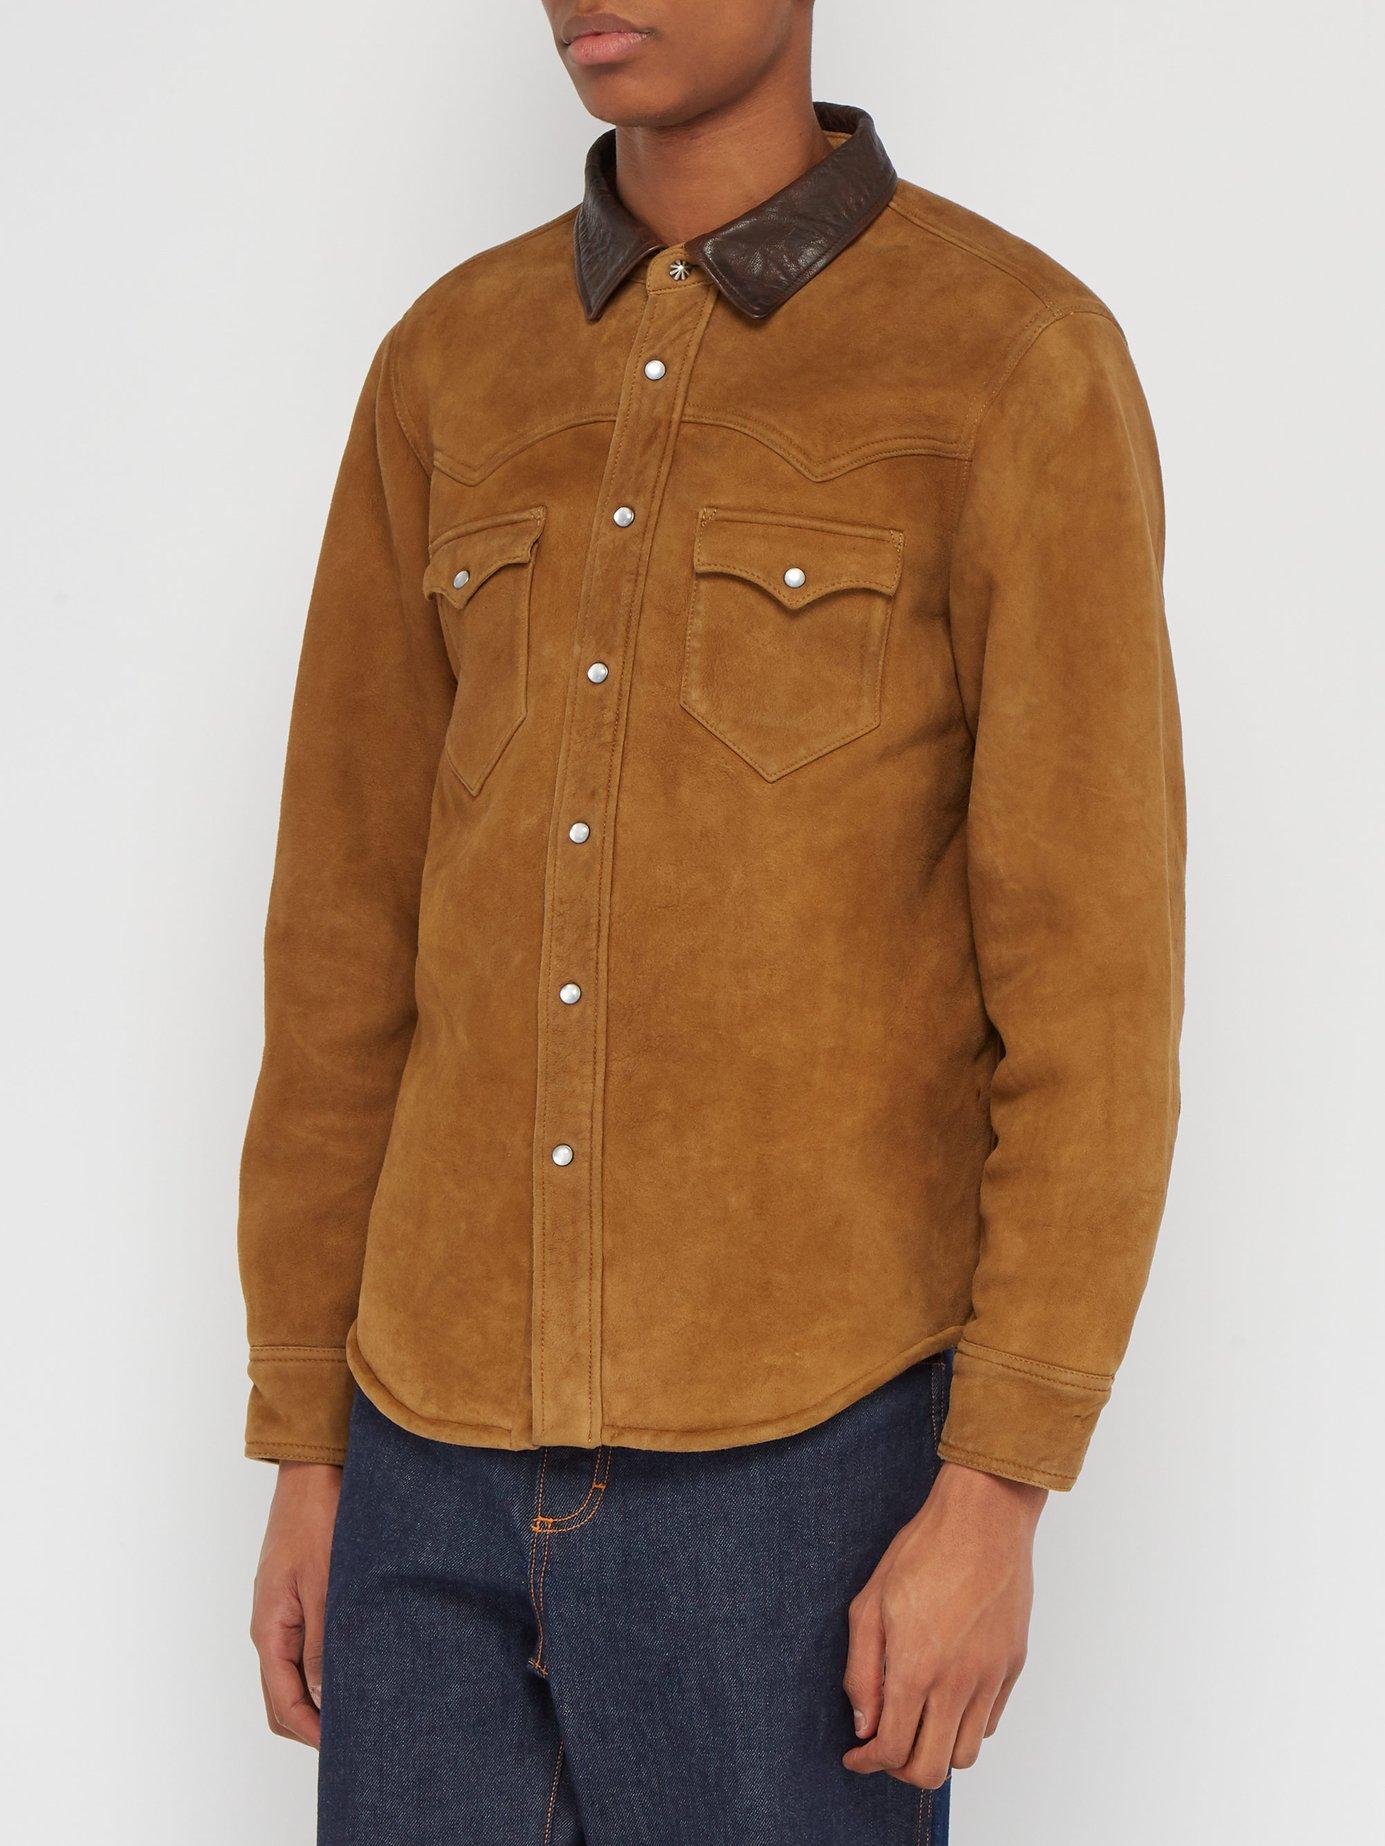 RRL Leather Collar Suede Jacket in Brown for Men - Lyst